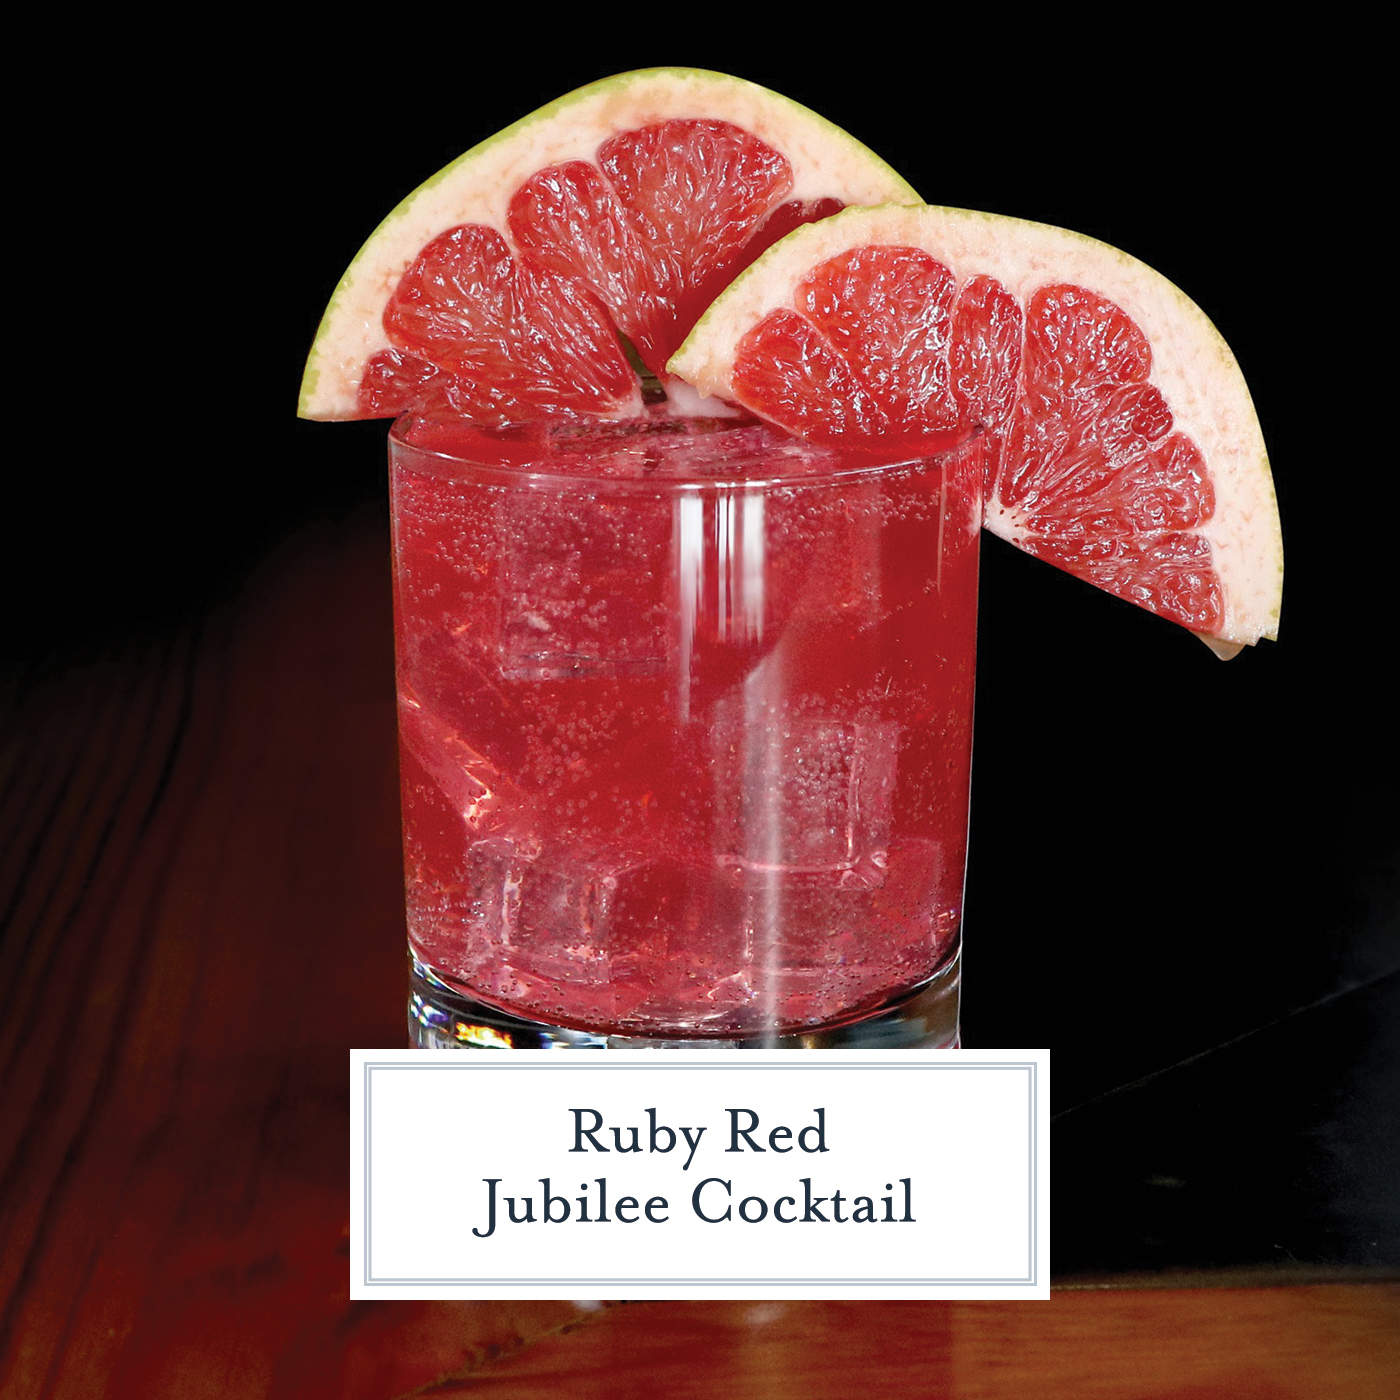 Ruby Red Jubilee Cocktail is the perfect holiday cocktail made with Sagamore Spirit rye whiskey, grapefruit and lime juice and cinnamon syrup. #whiskeycocktails www.savoryexperiments.com 